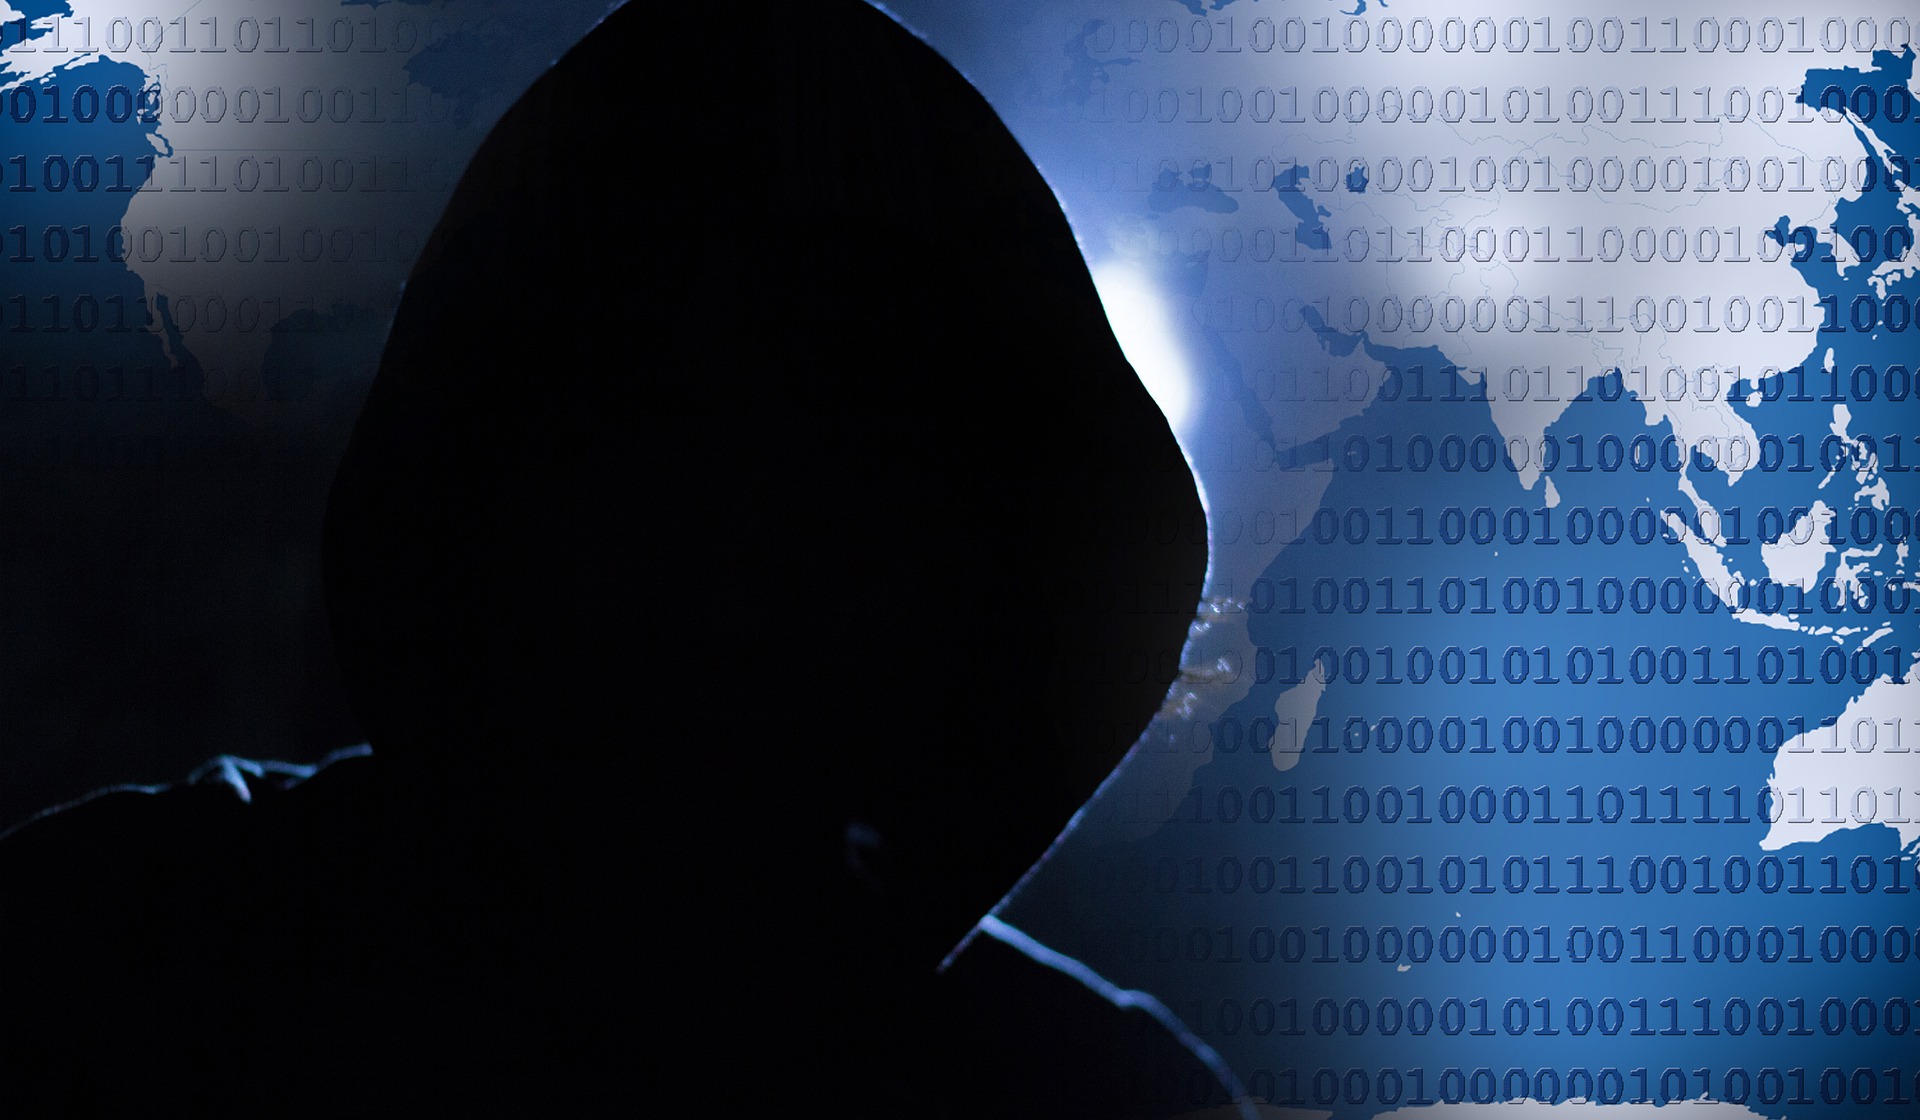 How can a hacker hack into a Facebook account?